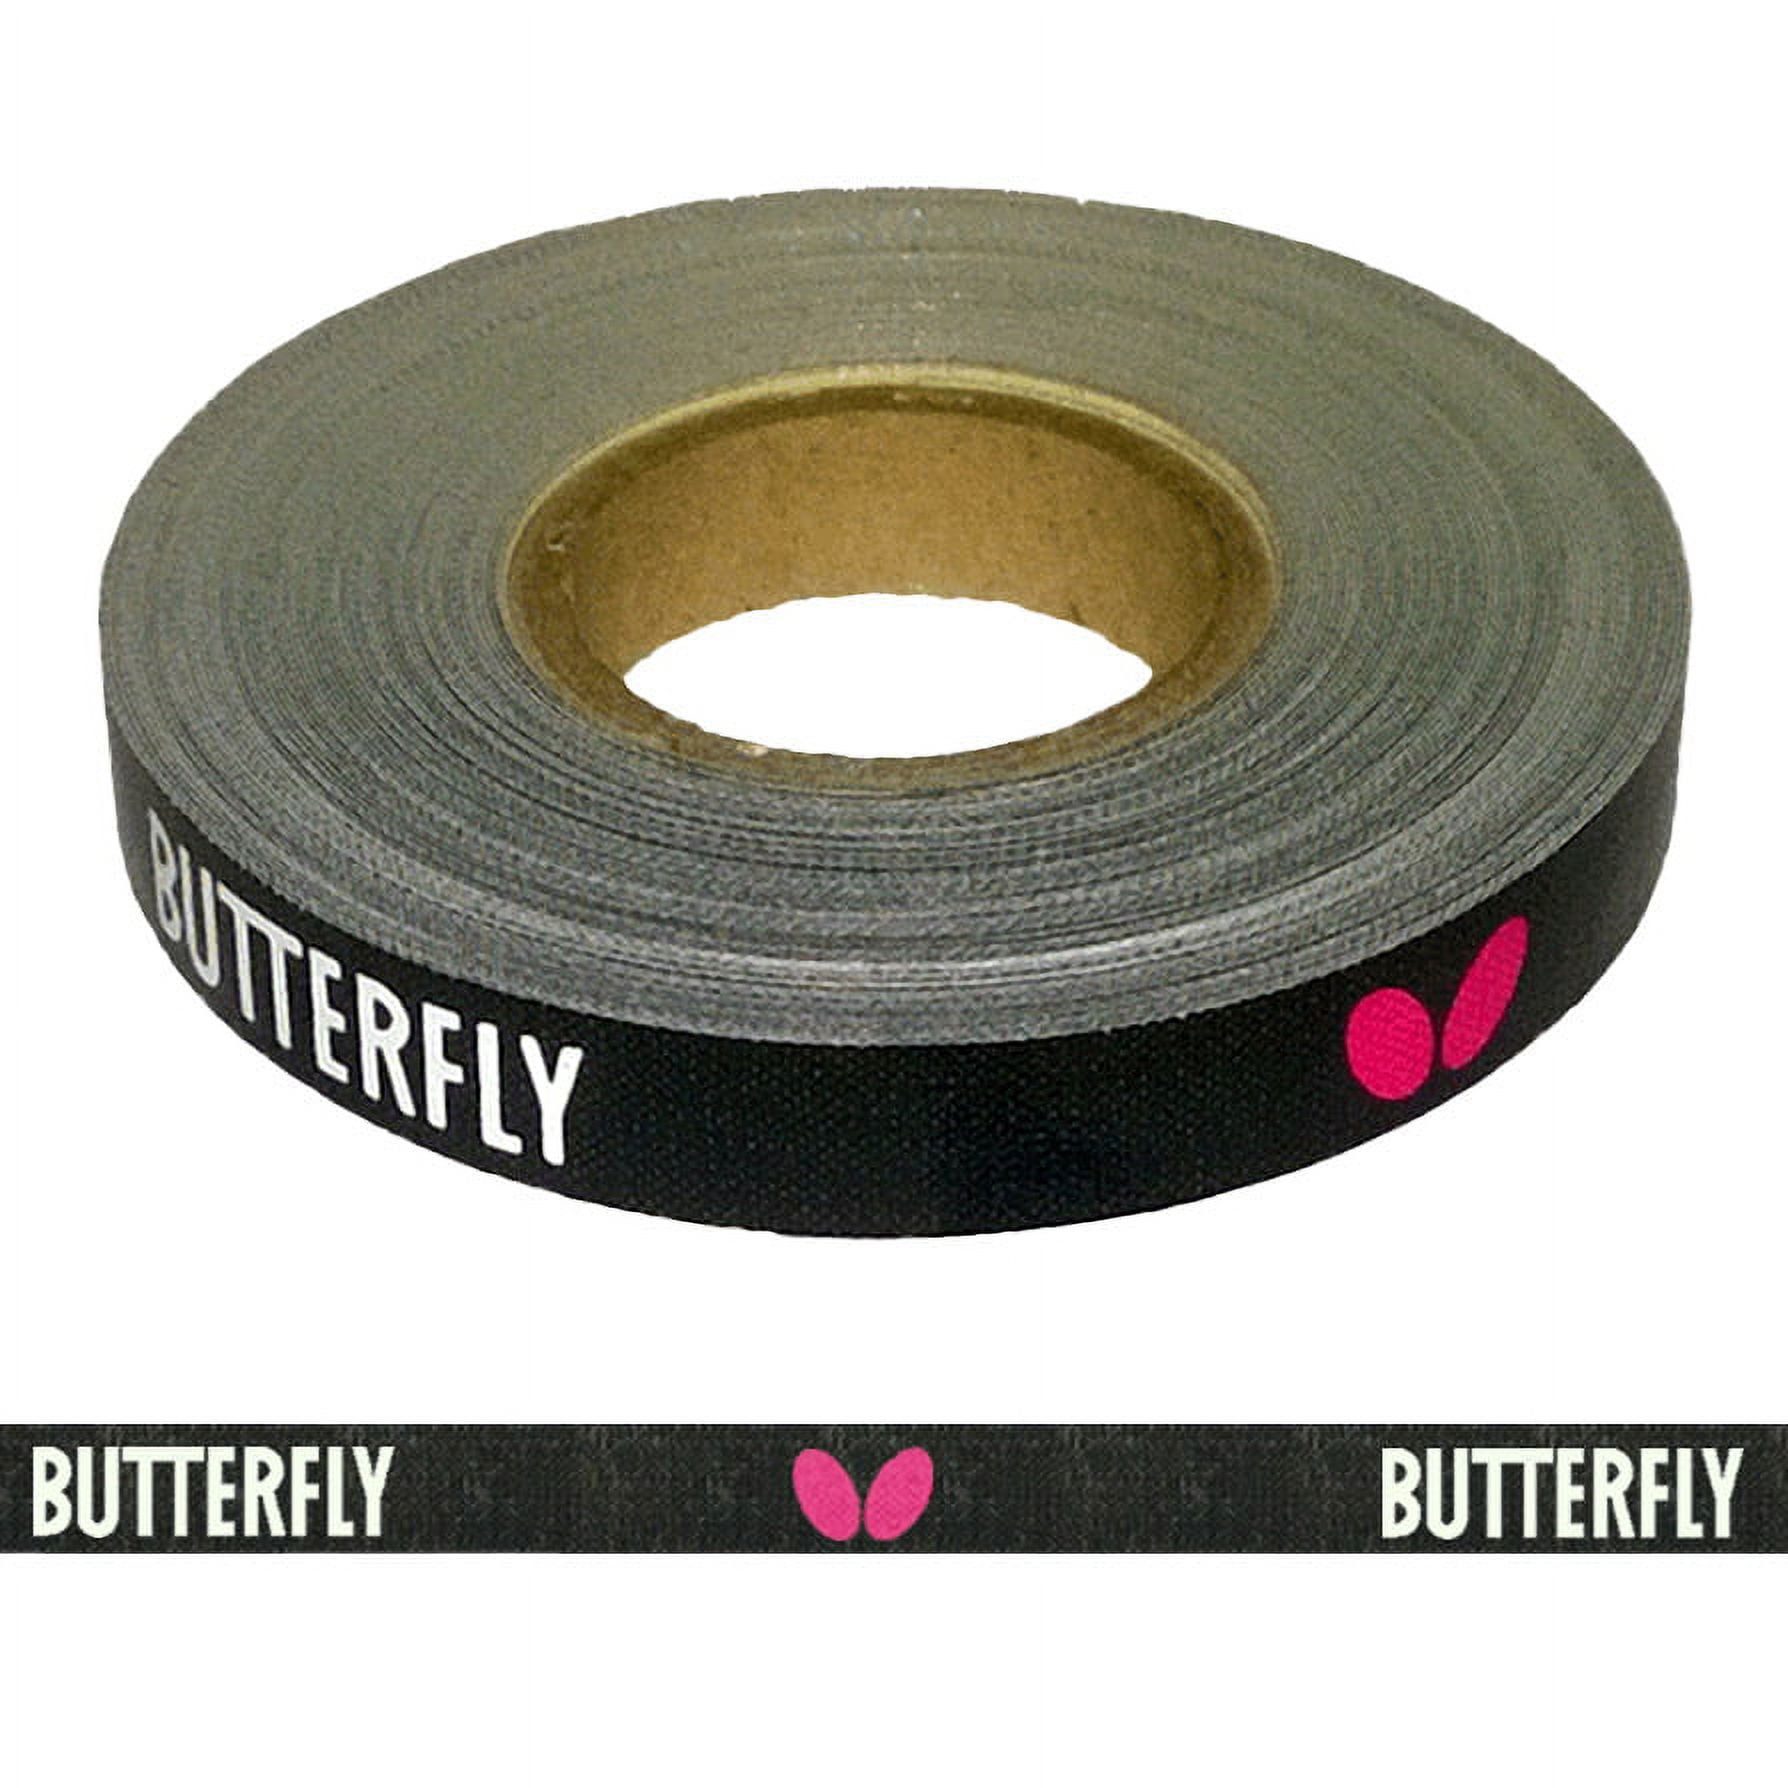  VELCRO Brand 5 Ft x 3/4 In, Black Tape Roll with Adhesive, Cut Strips to Length, Sticky Back Hook and Loop Fasteners